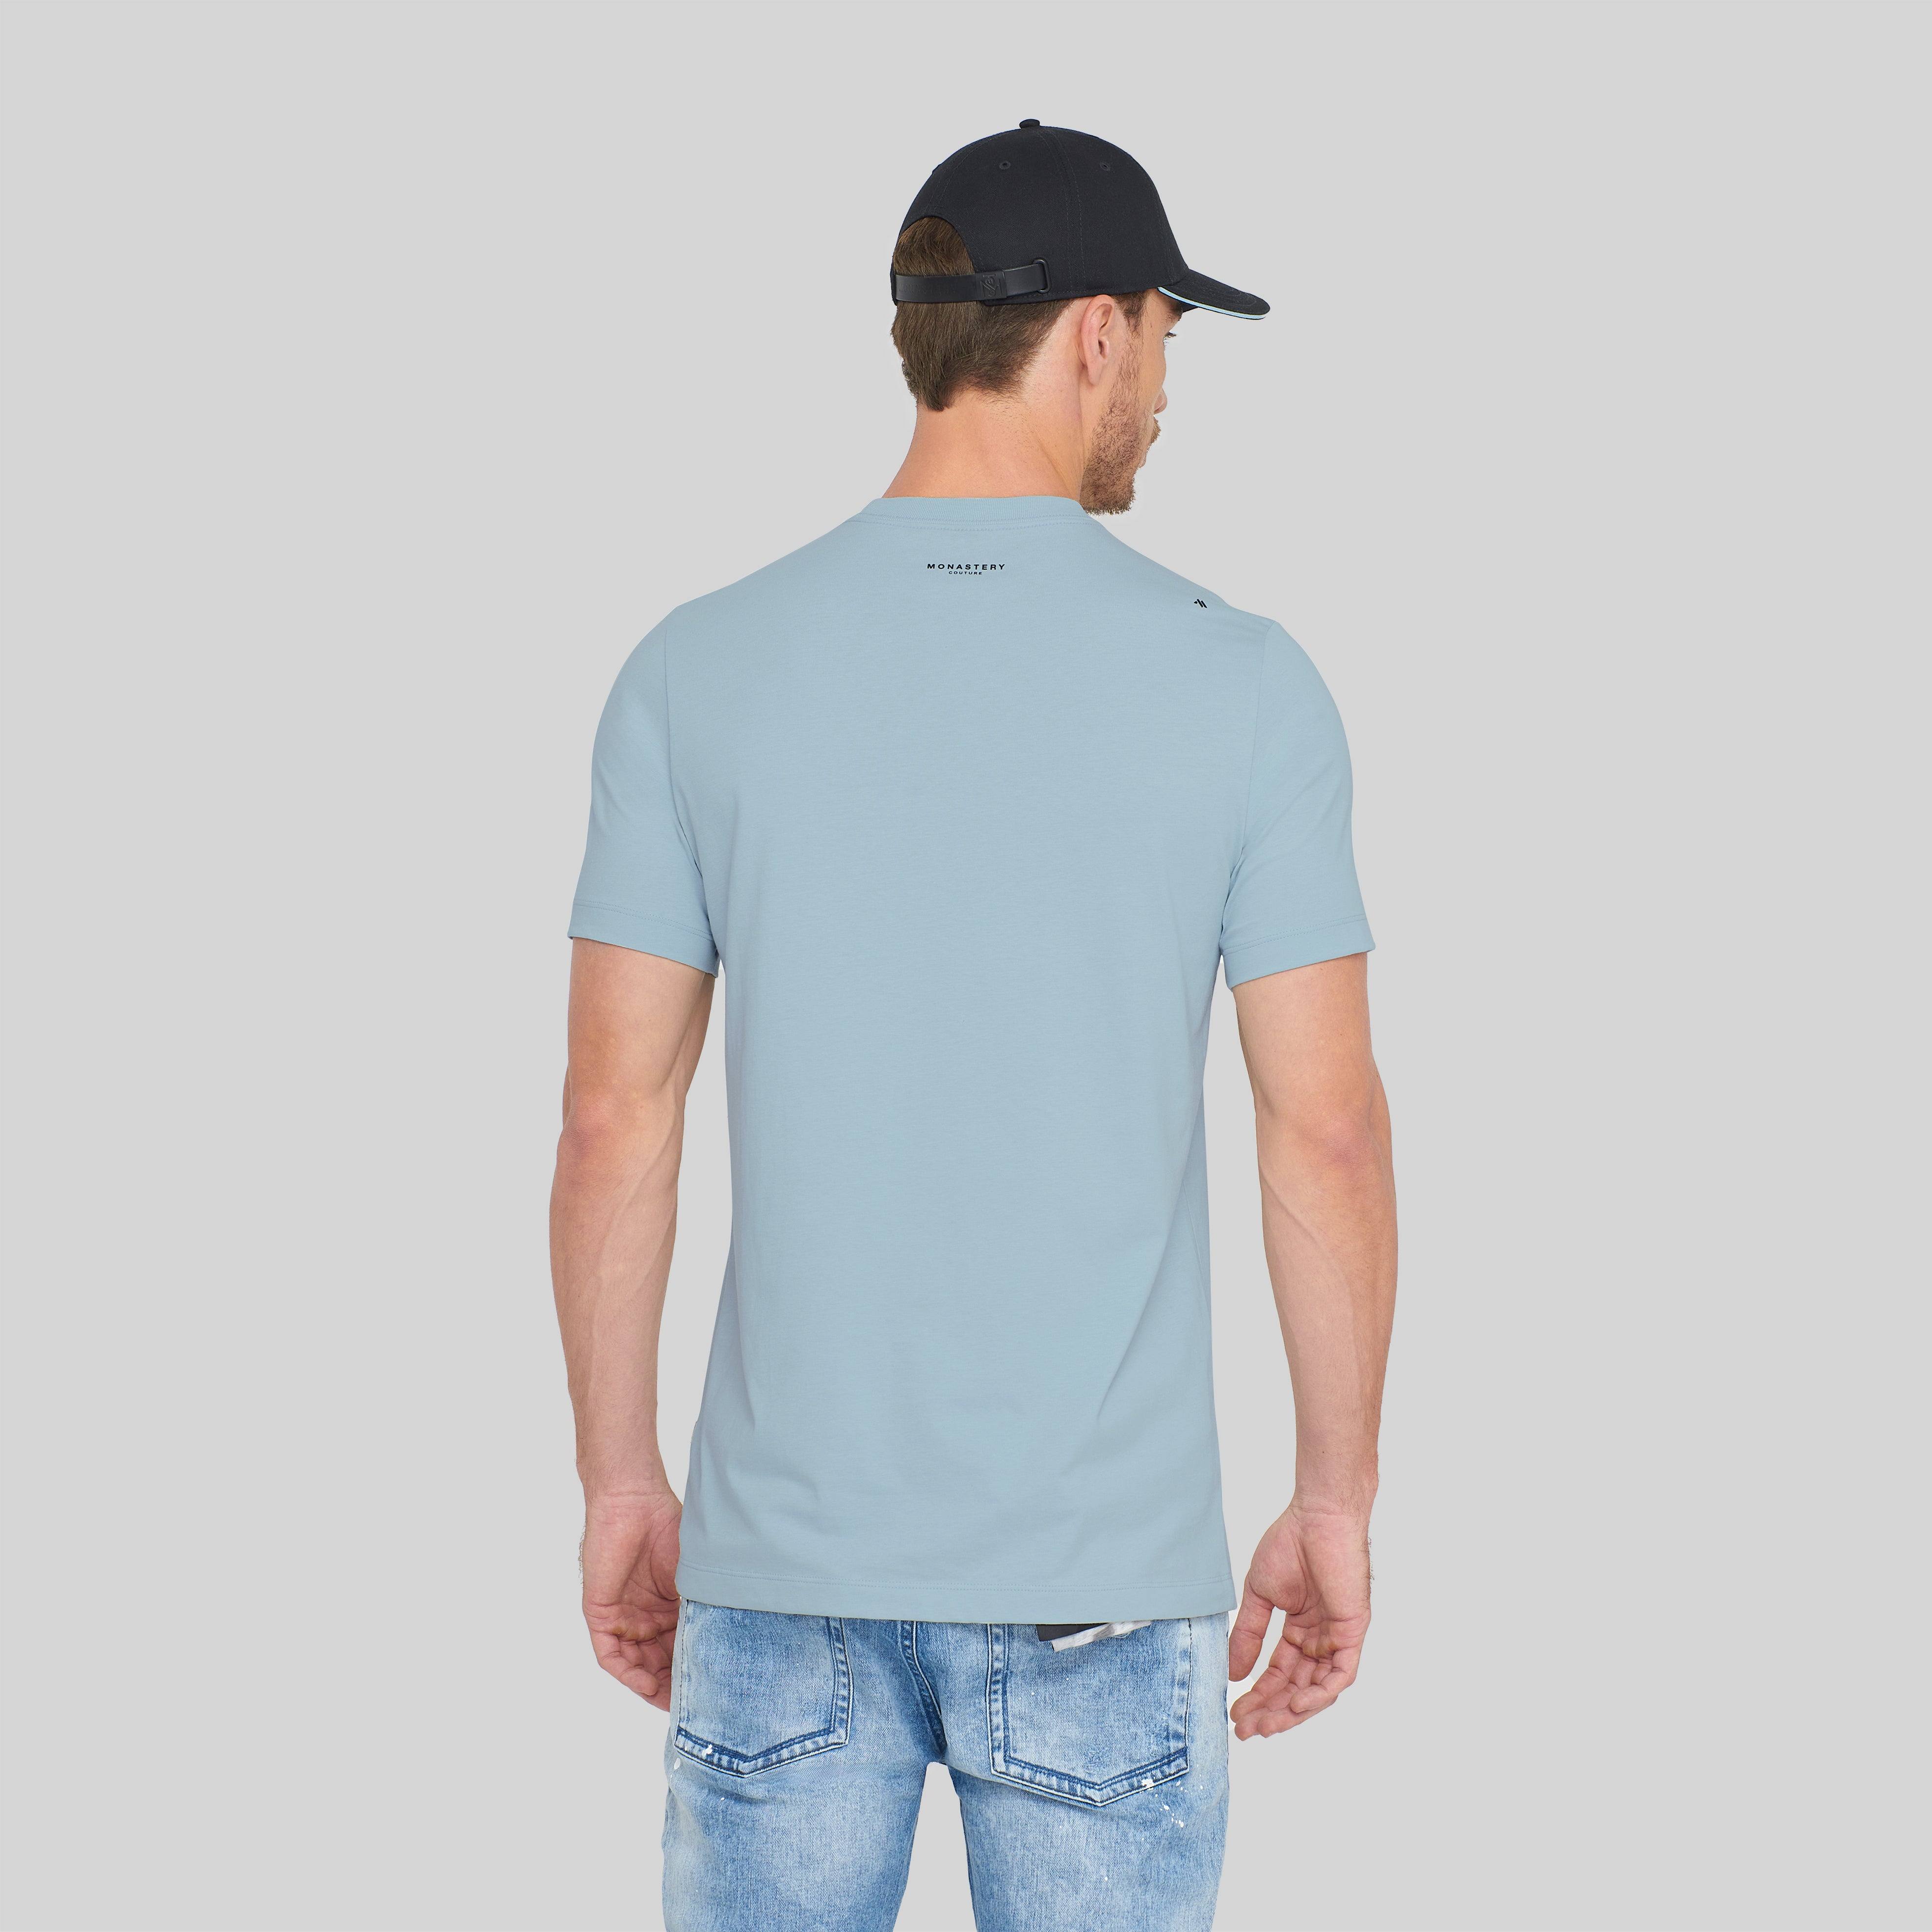 CHAD BLUE T-SHIRT | Monastery Couture